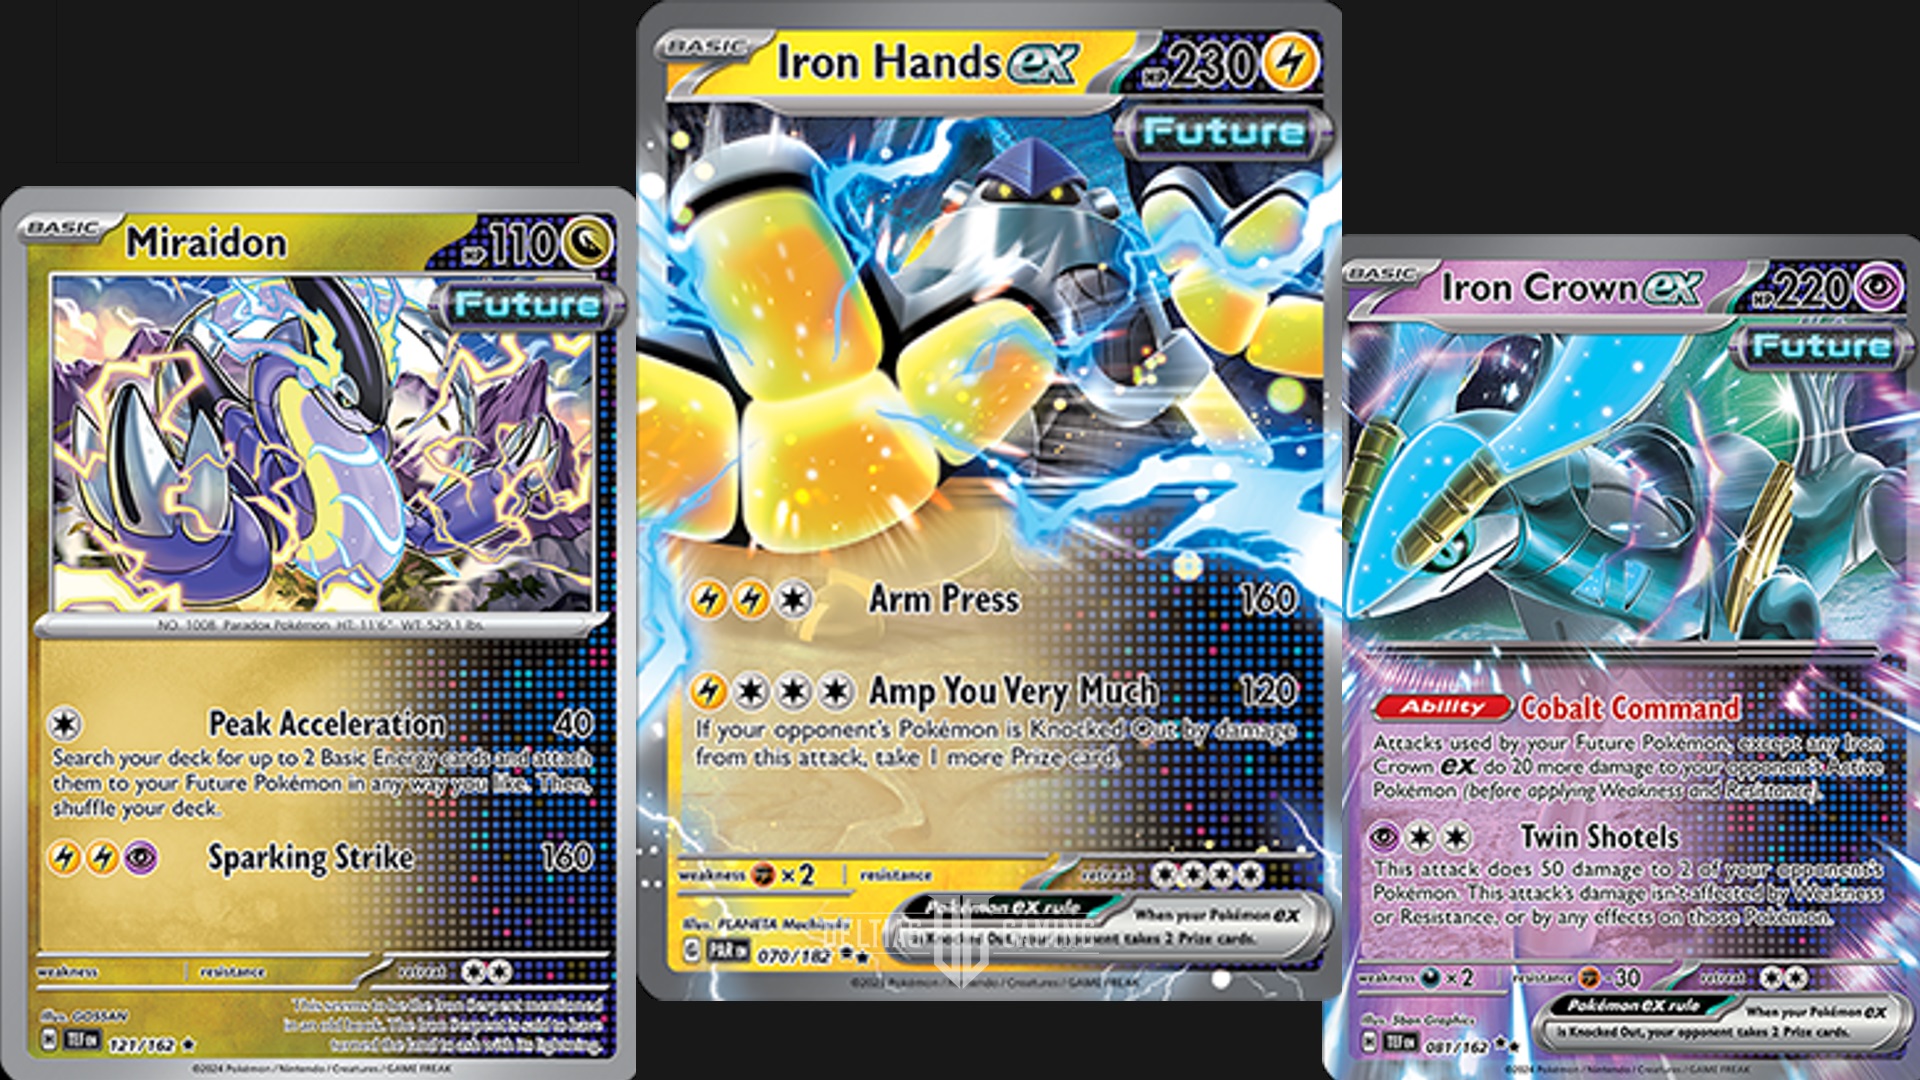 Pokemon TCG: Iron Hands ex Deck Guide and Deck List